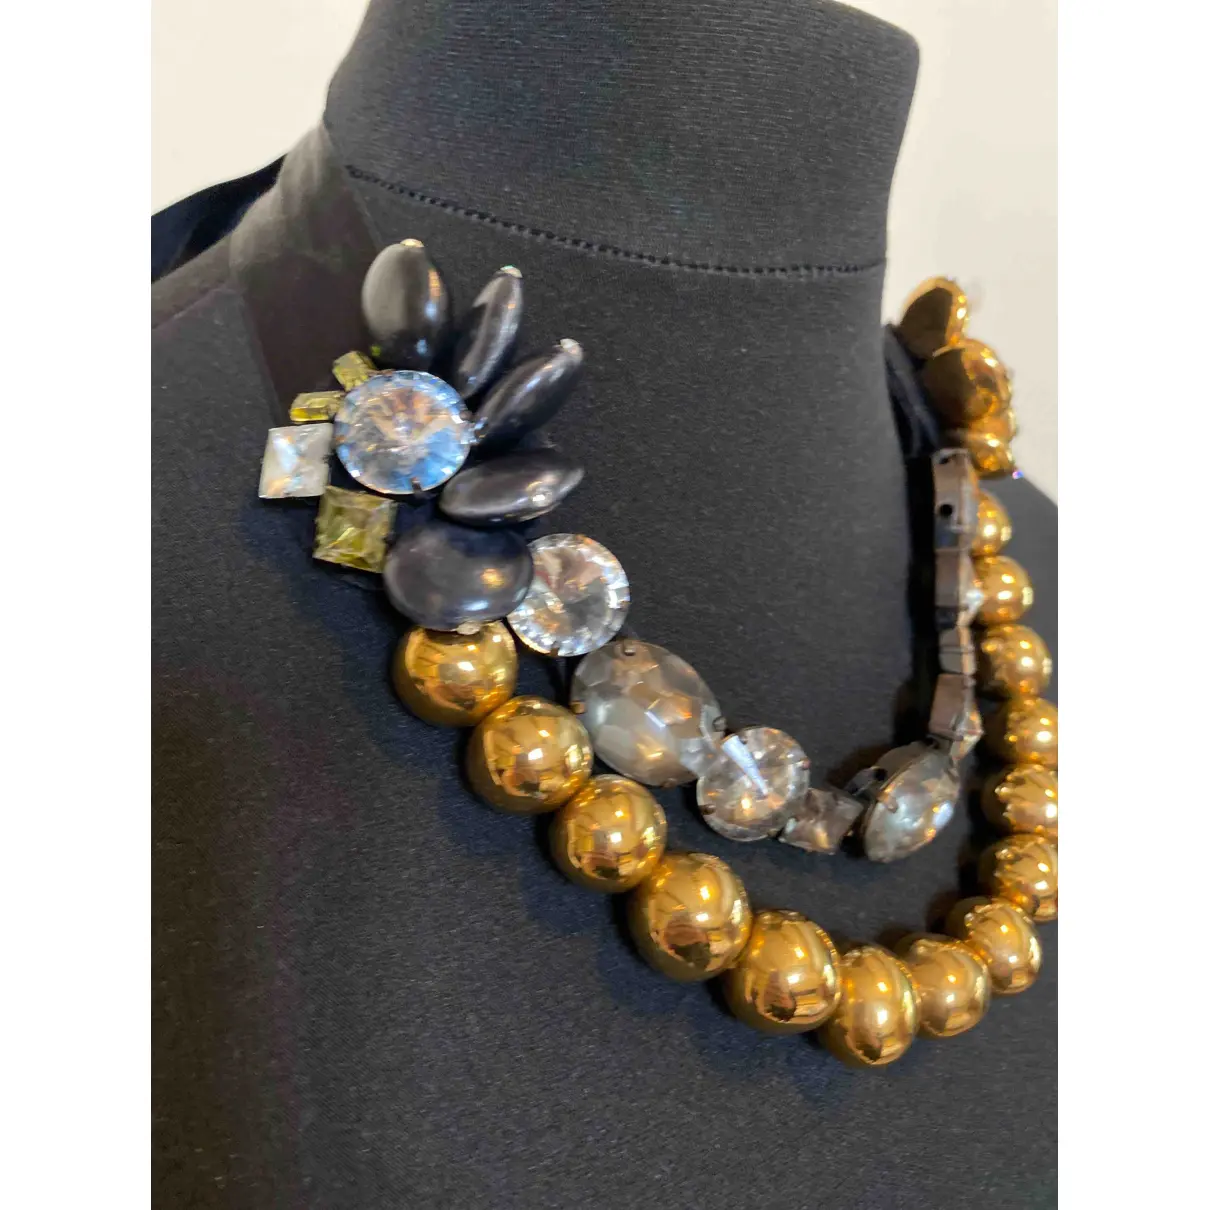 Buy Marni Necklace online